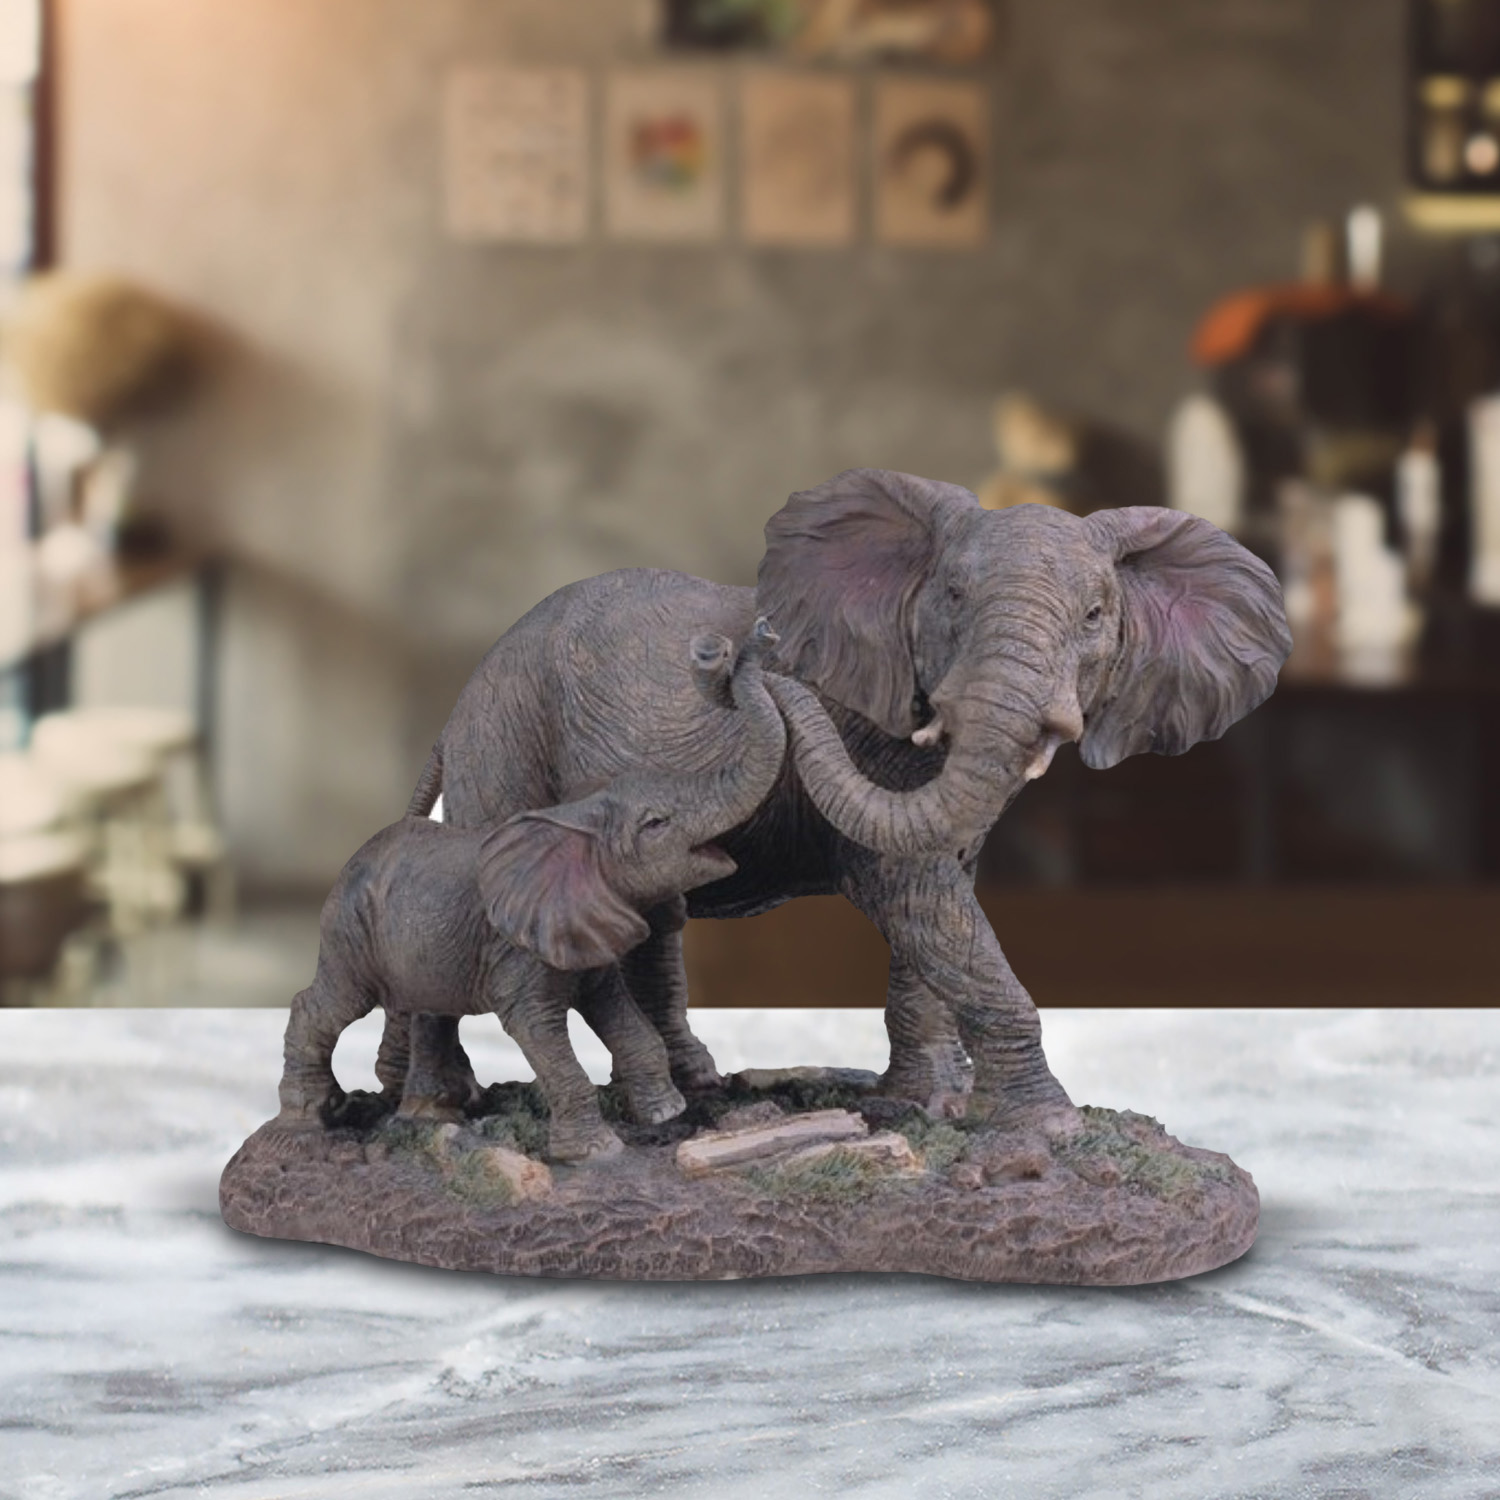 

9"h Elephant Mother And Baby With Trunk Up Figurine Statue Ornament Home/room Decor And Perfect Gift Ideas For House Warming, Holidays And Birthdays Great Collectible Addition